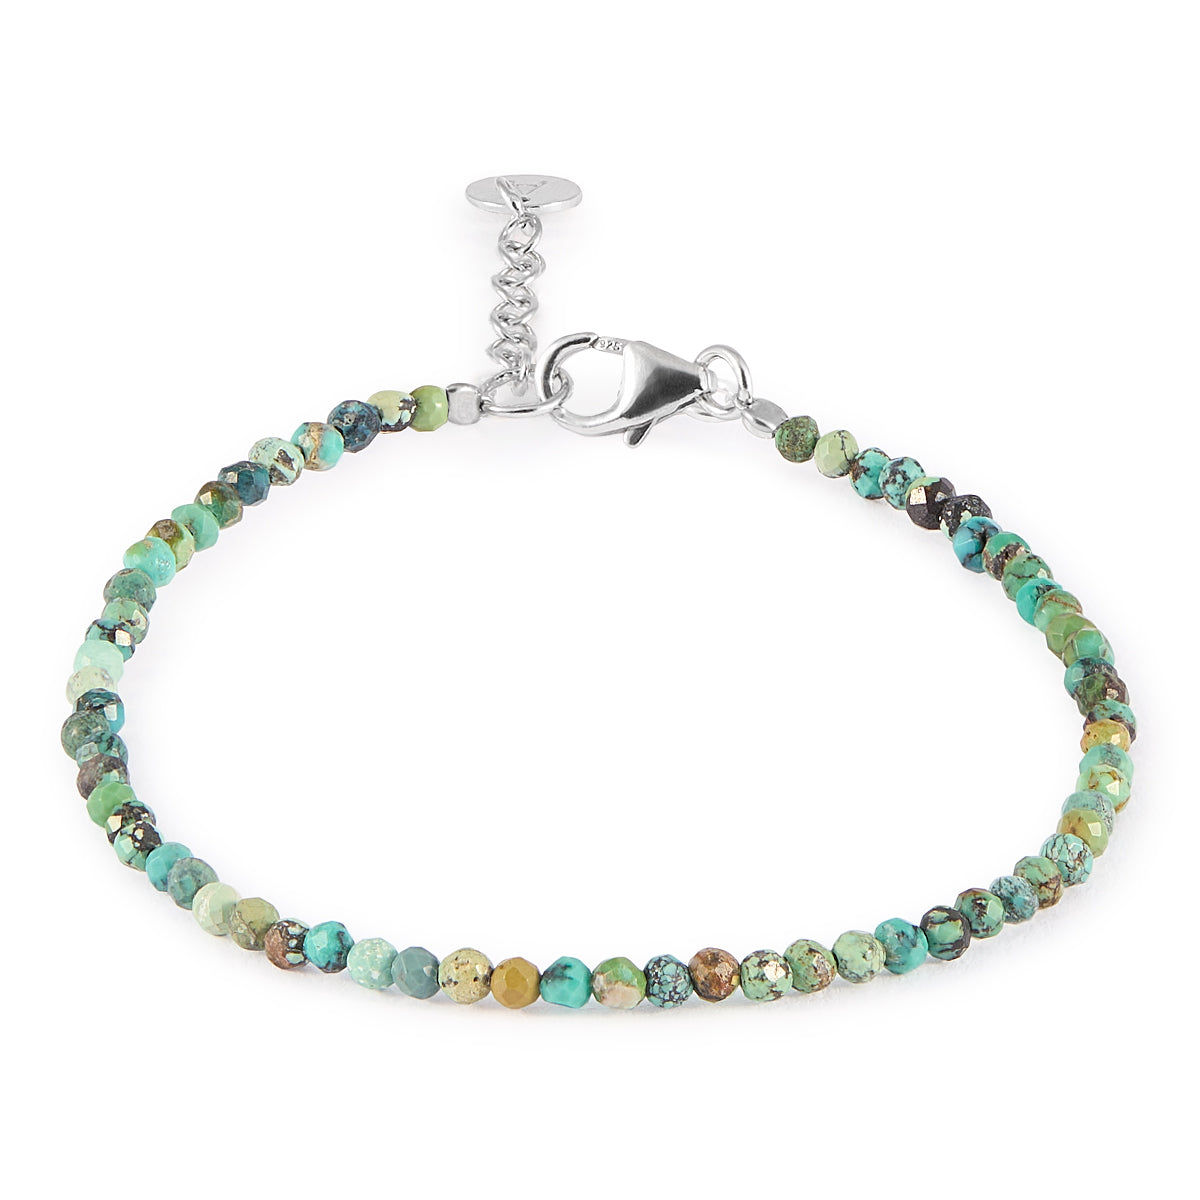 TURQUOISE BRACELET WITH SILVER CLASP